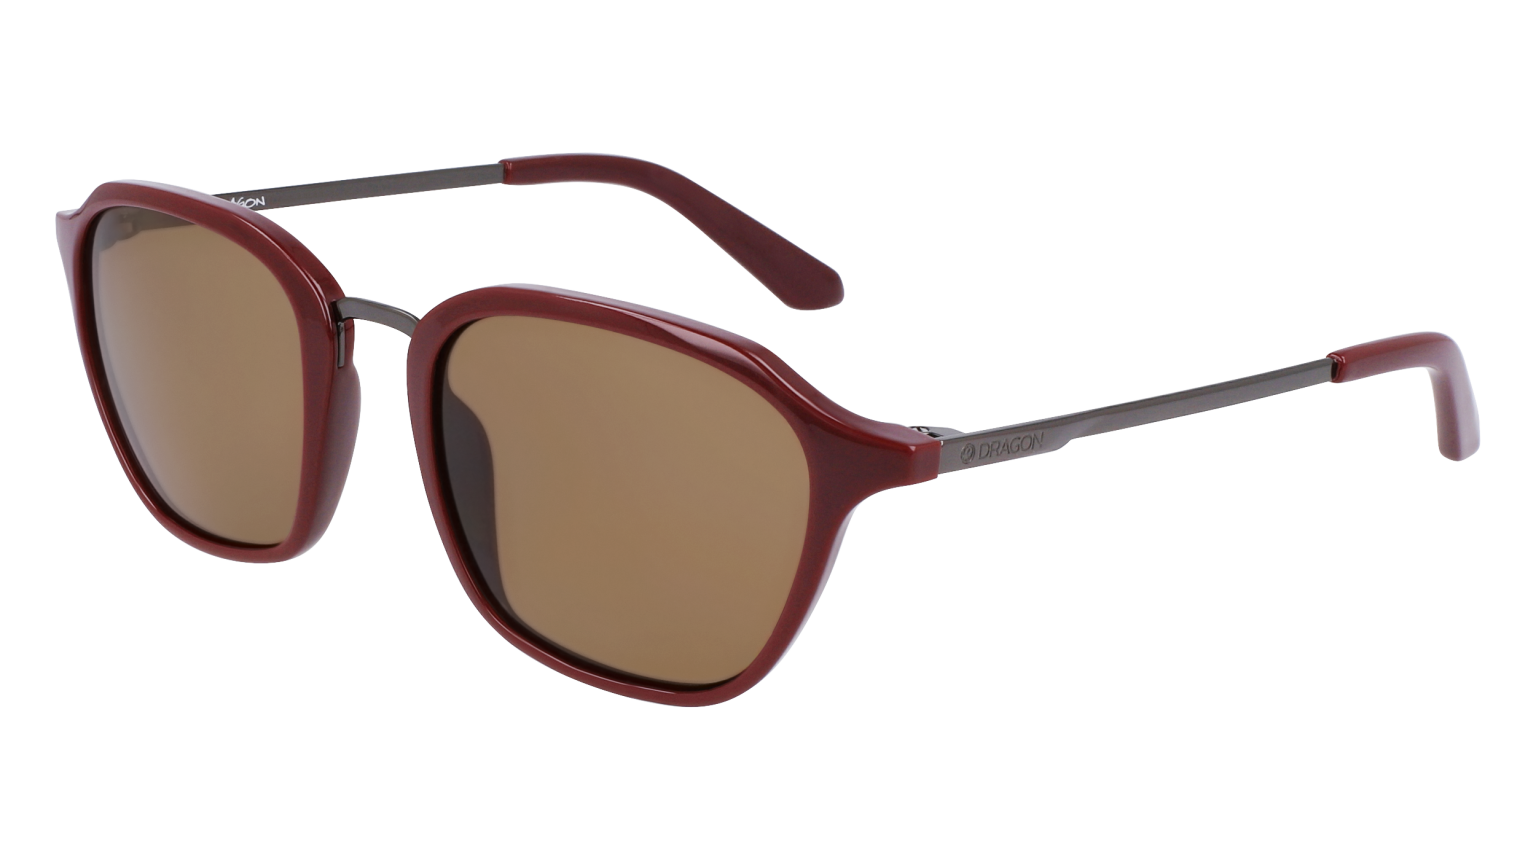 FALLON - Shiny Oxblood with Lumalens Brown Lens